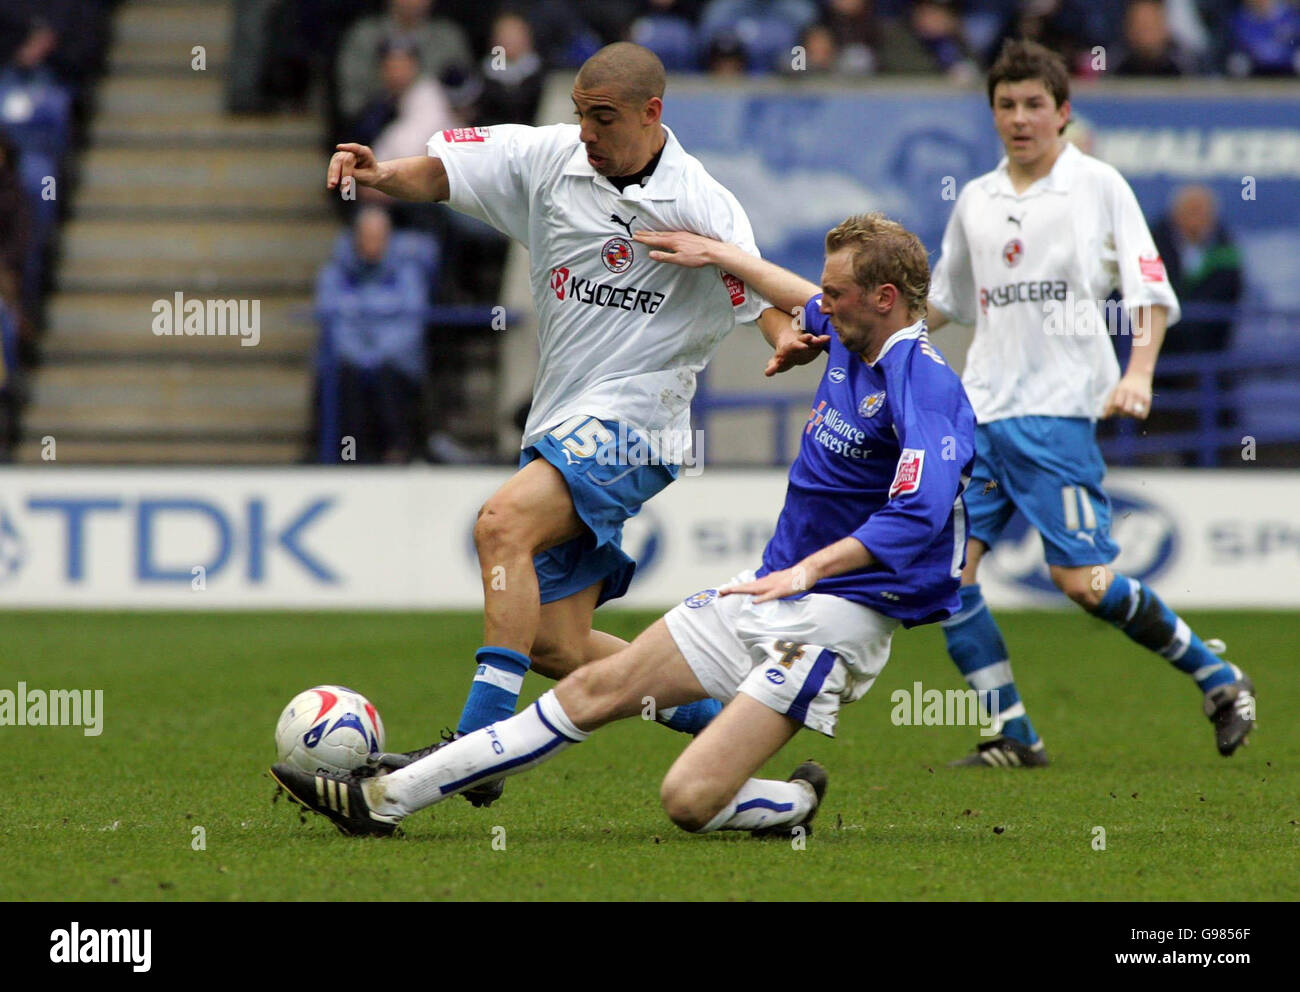 Leicester City's Stephen Hughes challenges Reading's James Harper during the Coca-Cola Championship match at the Walkers Stadium, Leicester, Saturday March 25, 2006. PRESS ASSOCIATION Photo. Photo credit should read: Roy Killcullen/PA. . Stock Photo